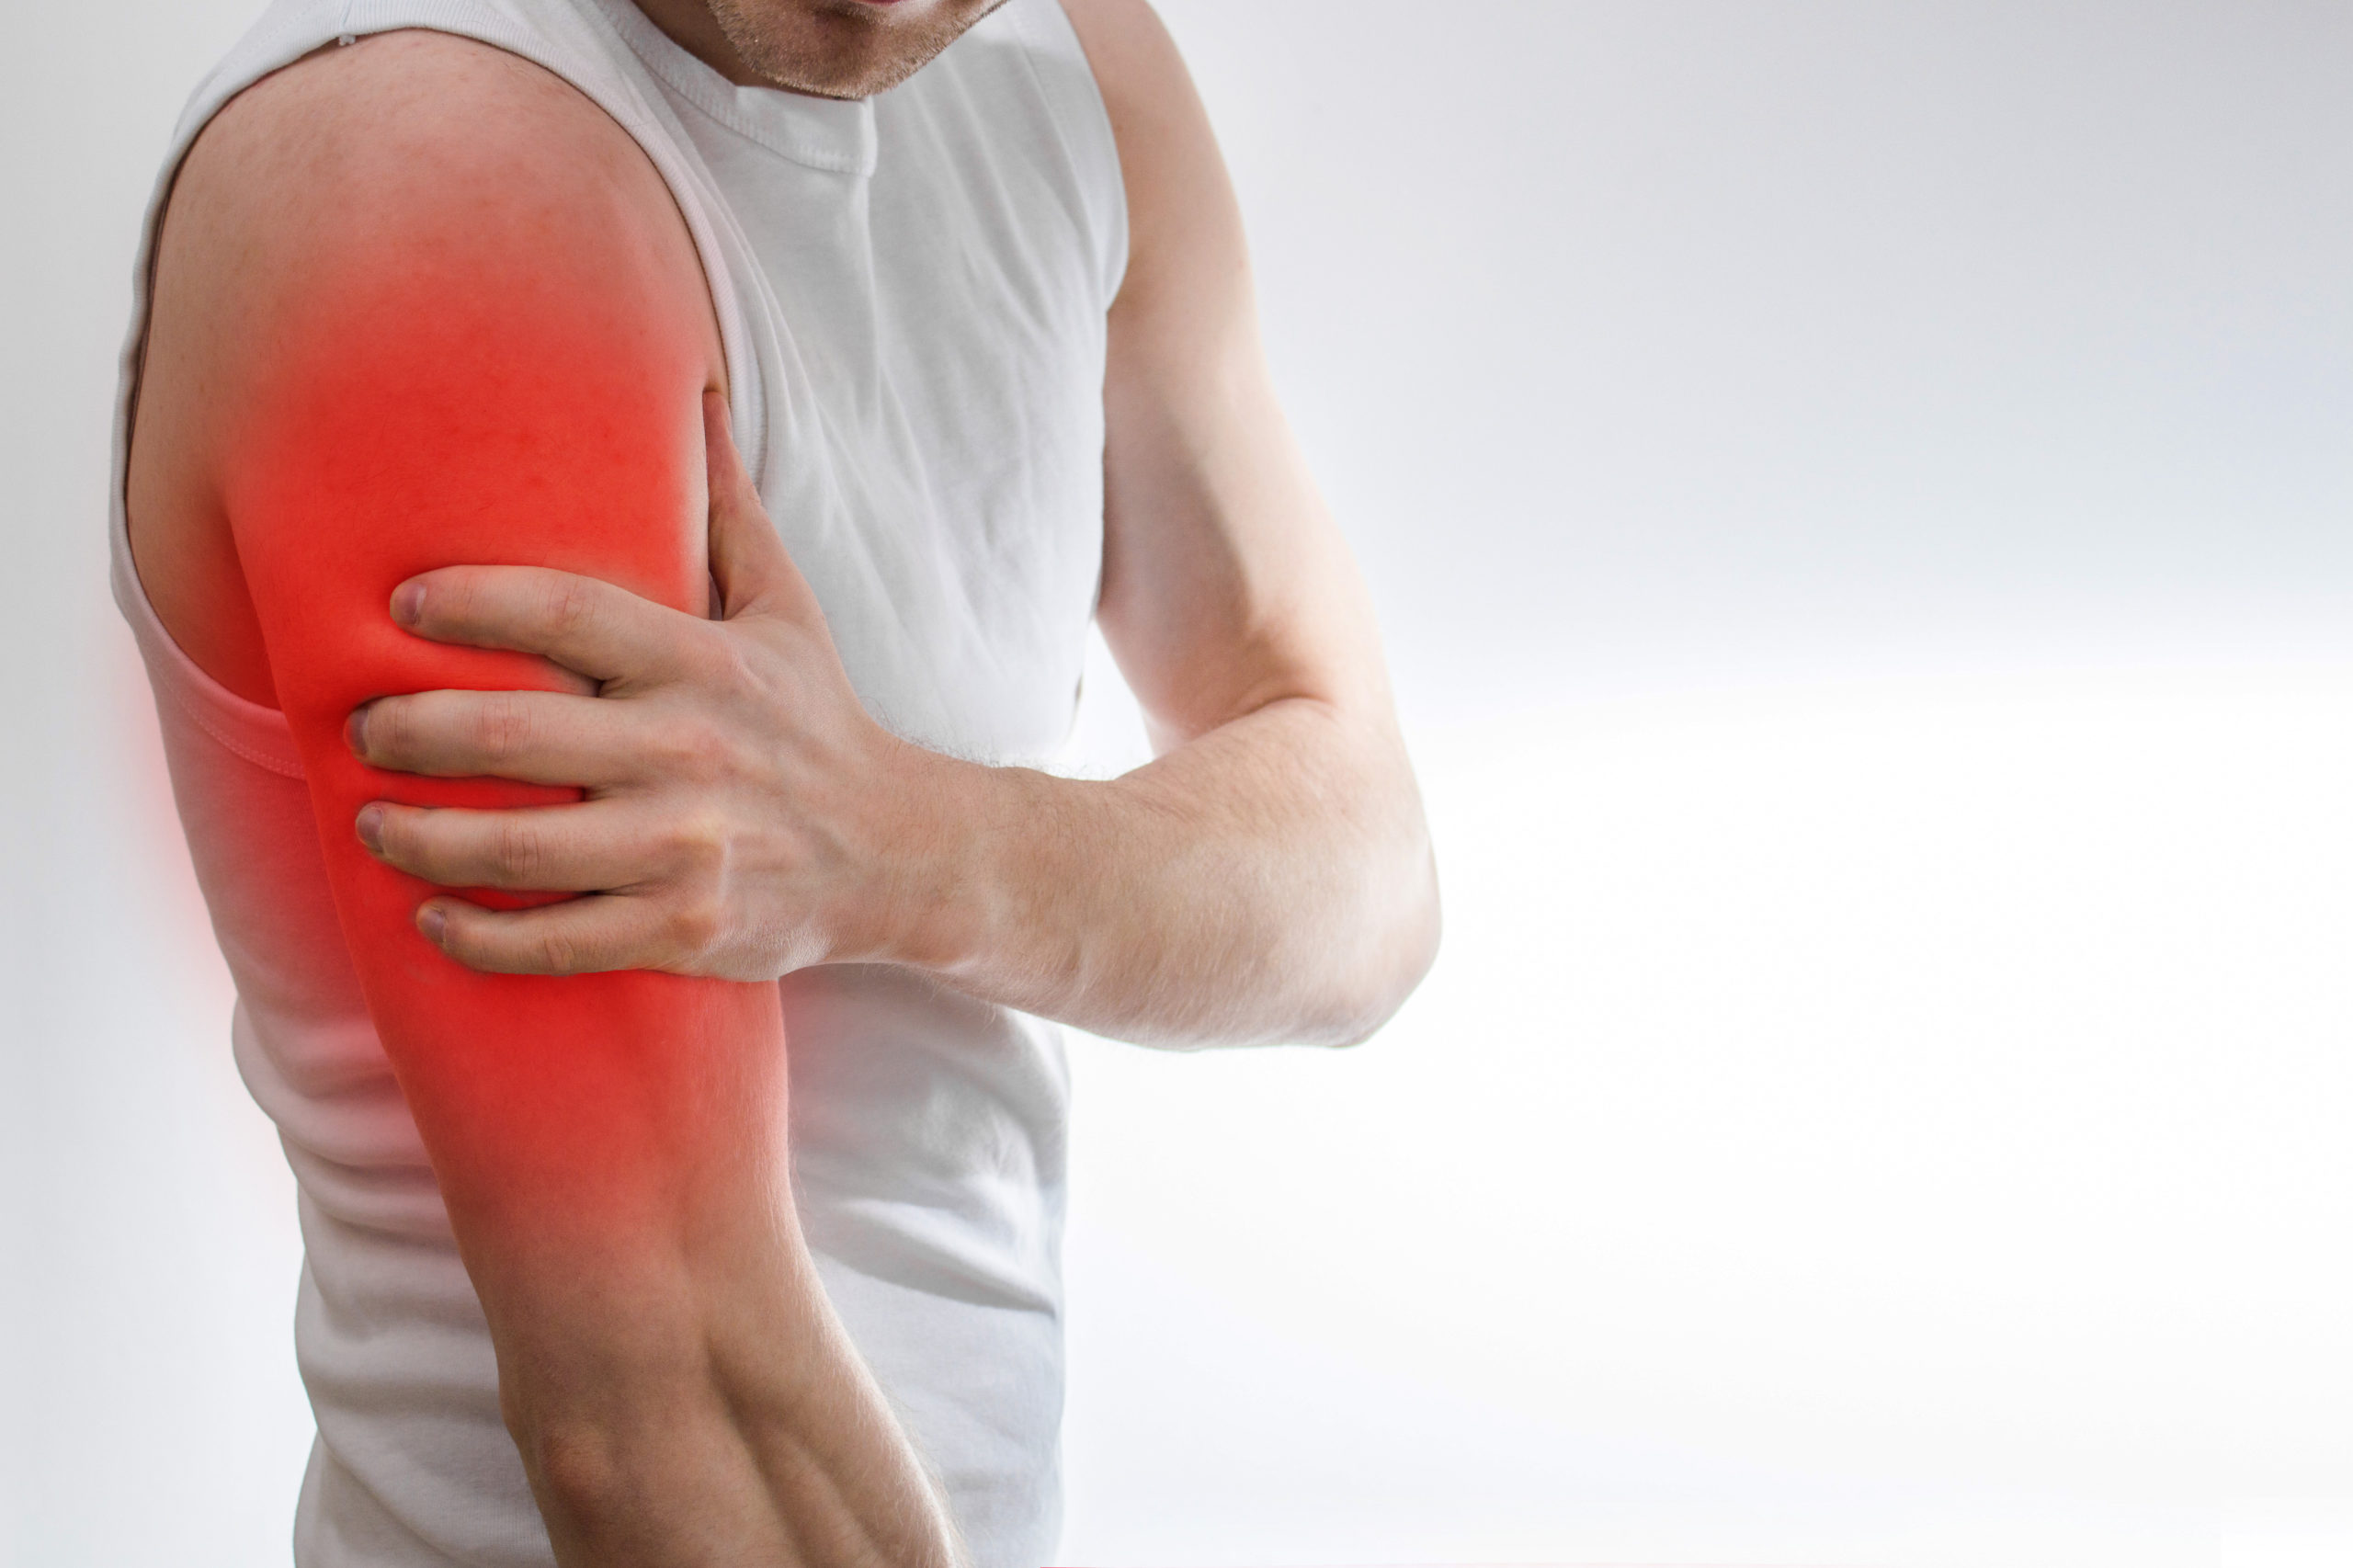 Arm pain - Causes, Symptoms, Prevention and Treatment